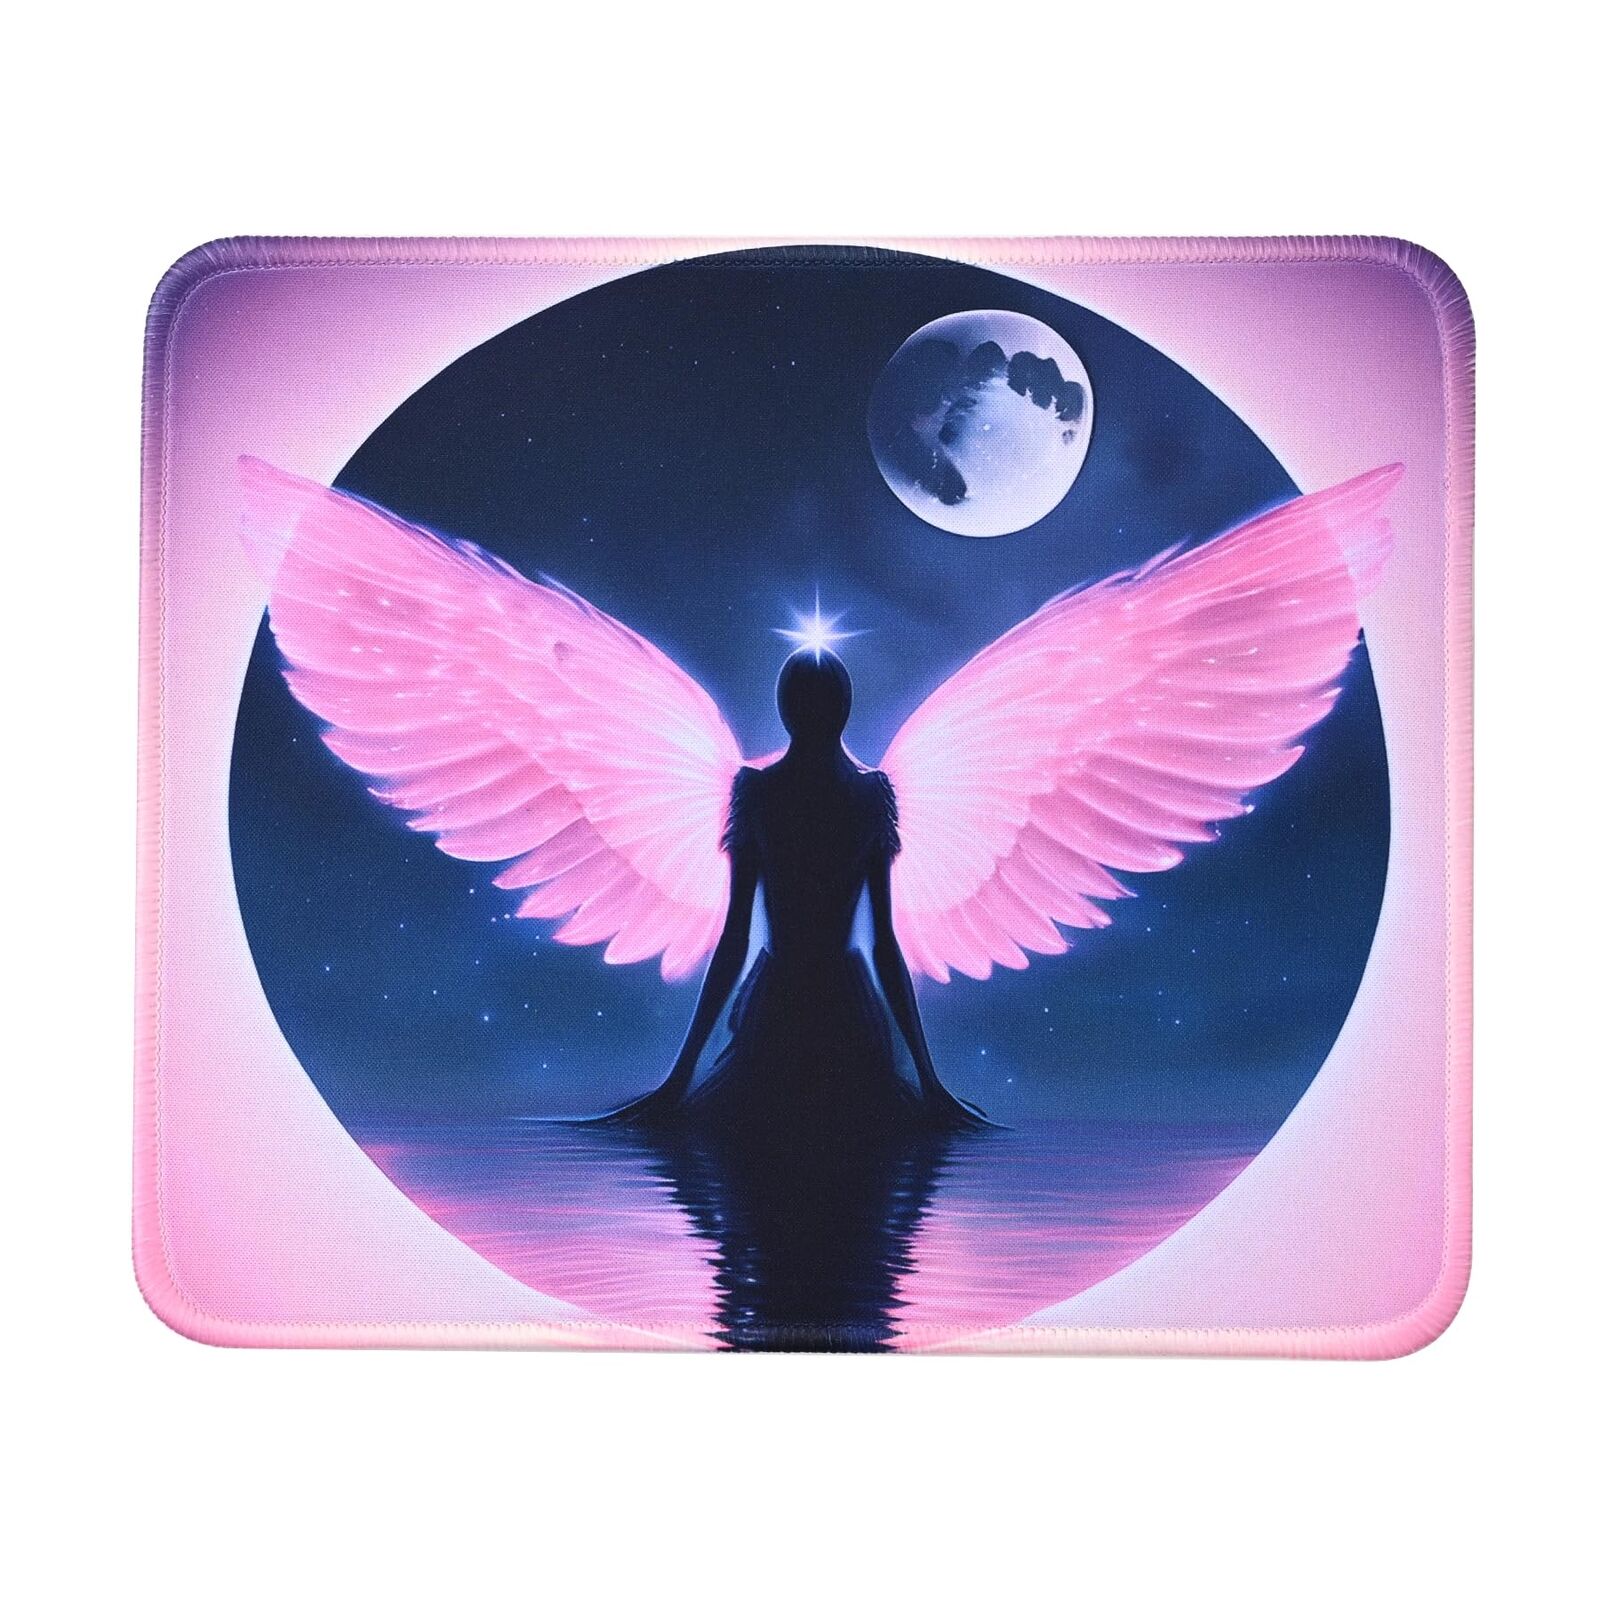 A Beautiful Angel Mouse Pad Pink Mouse PadNice Square Mousepad9.5 X 7.9 Inch ...